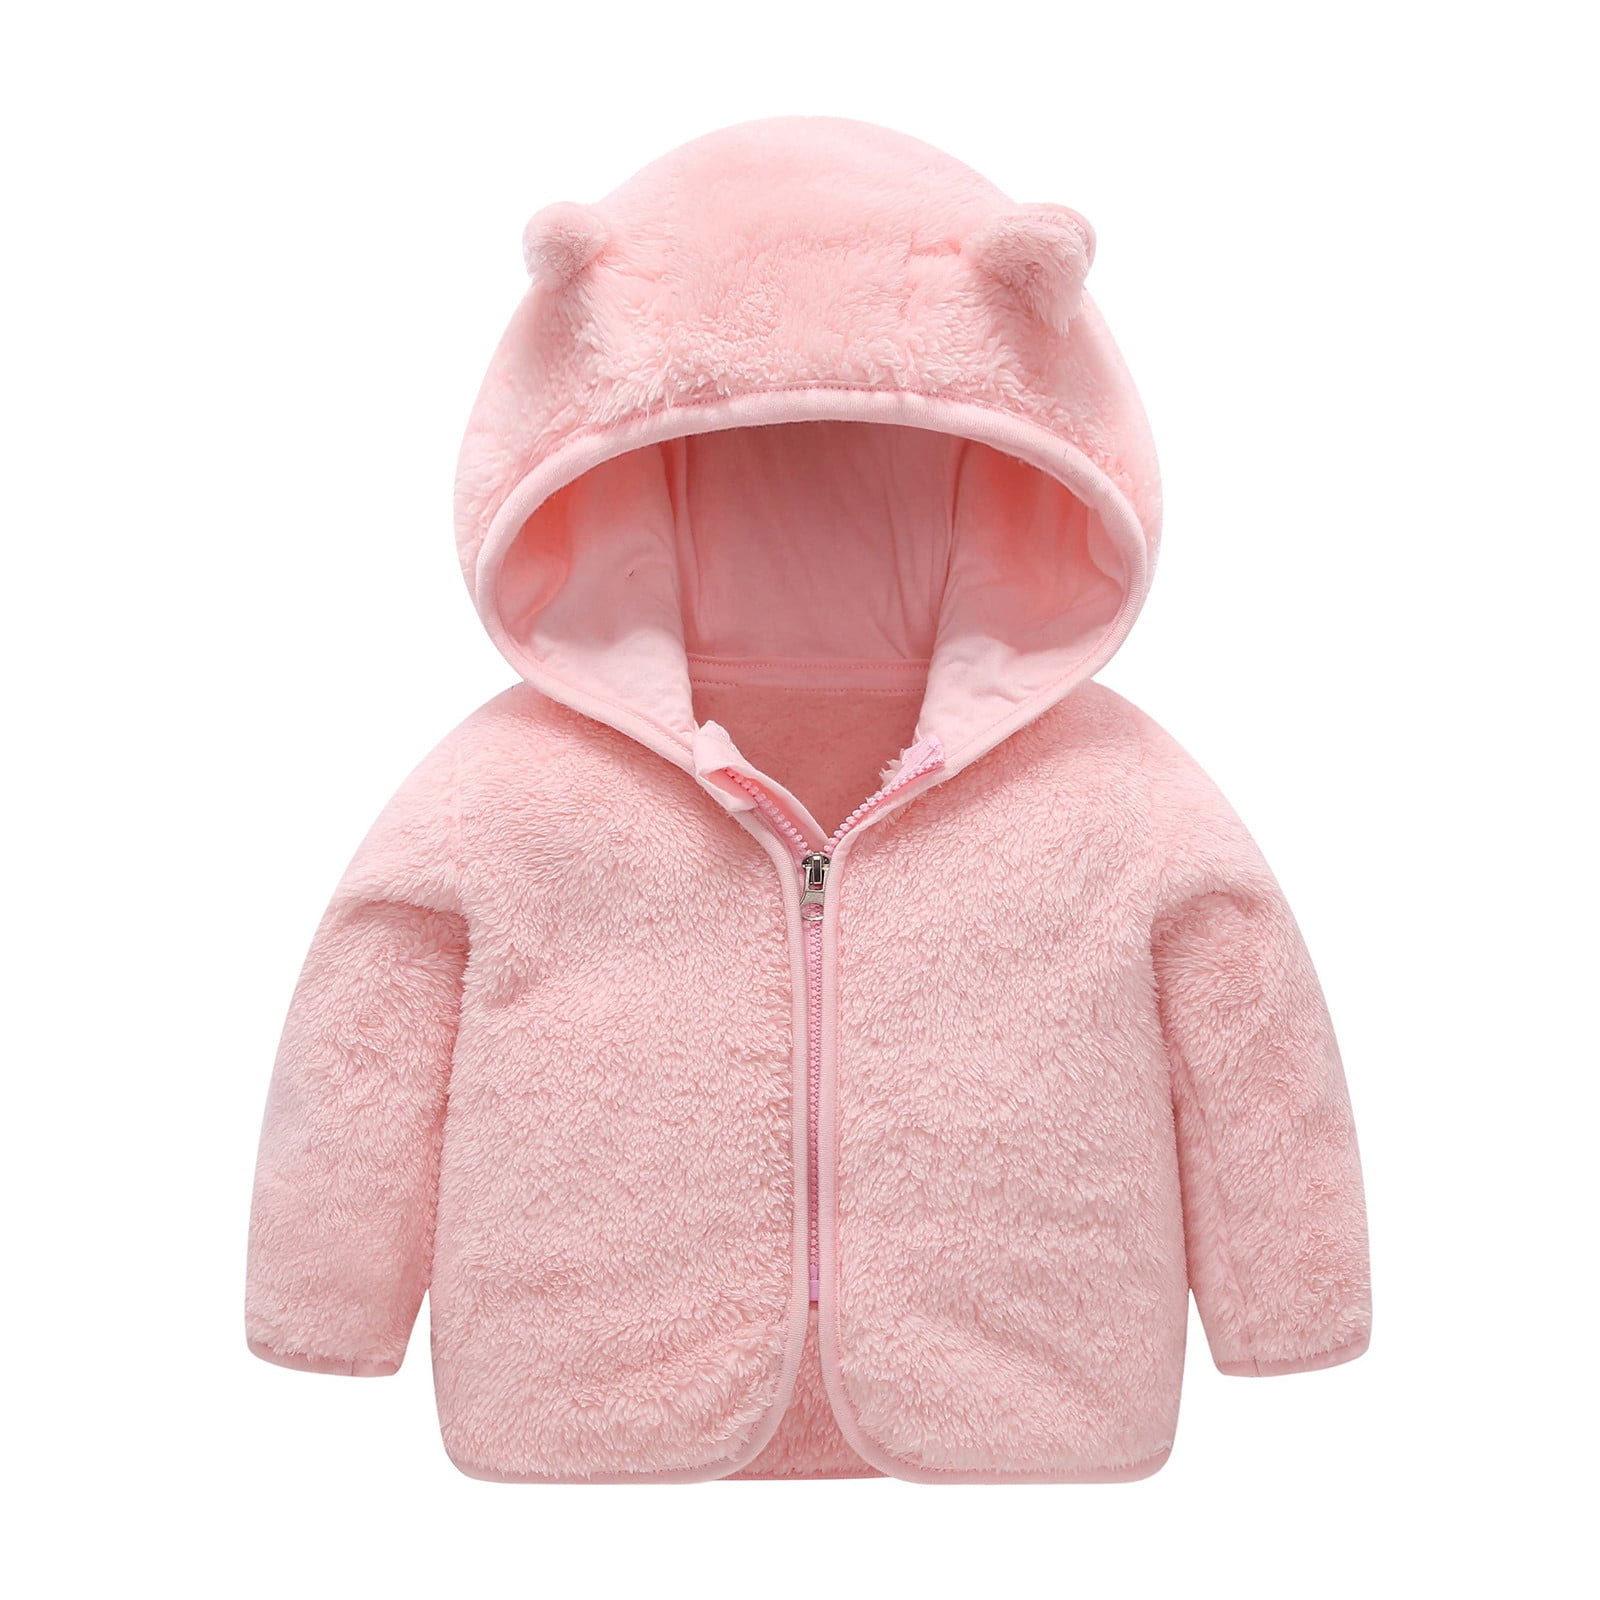 TAIAOJING Baby Girls Jacket Toddler Boys Winter Windproof Hooded Coat ...